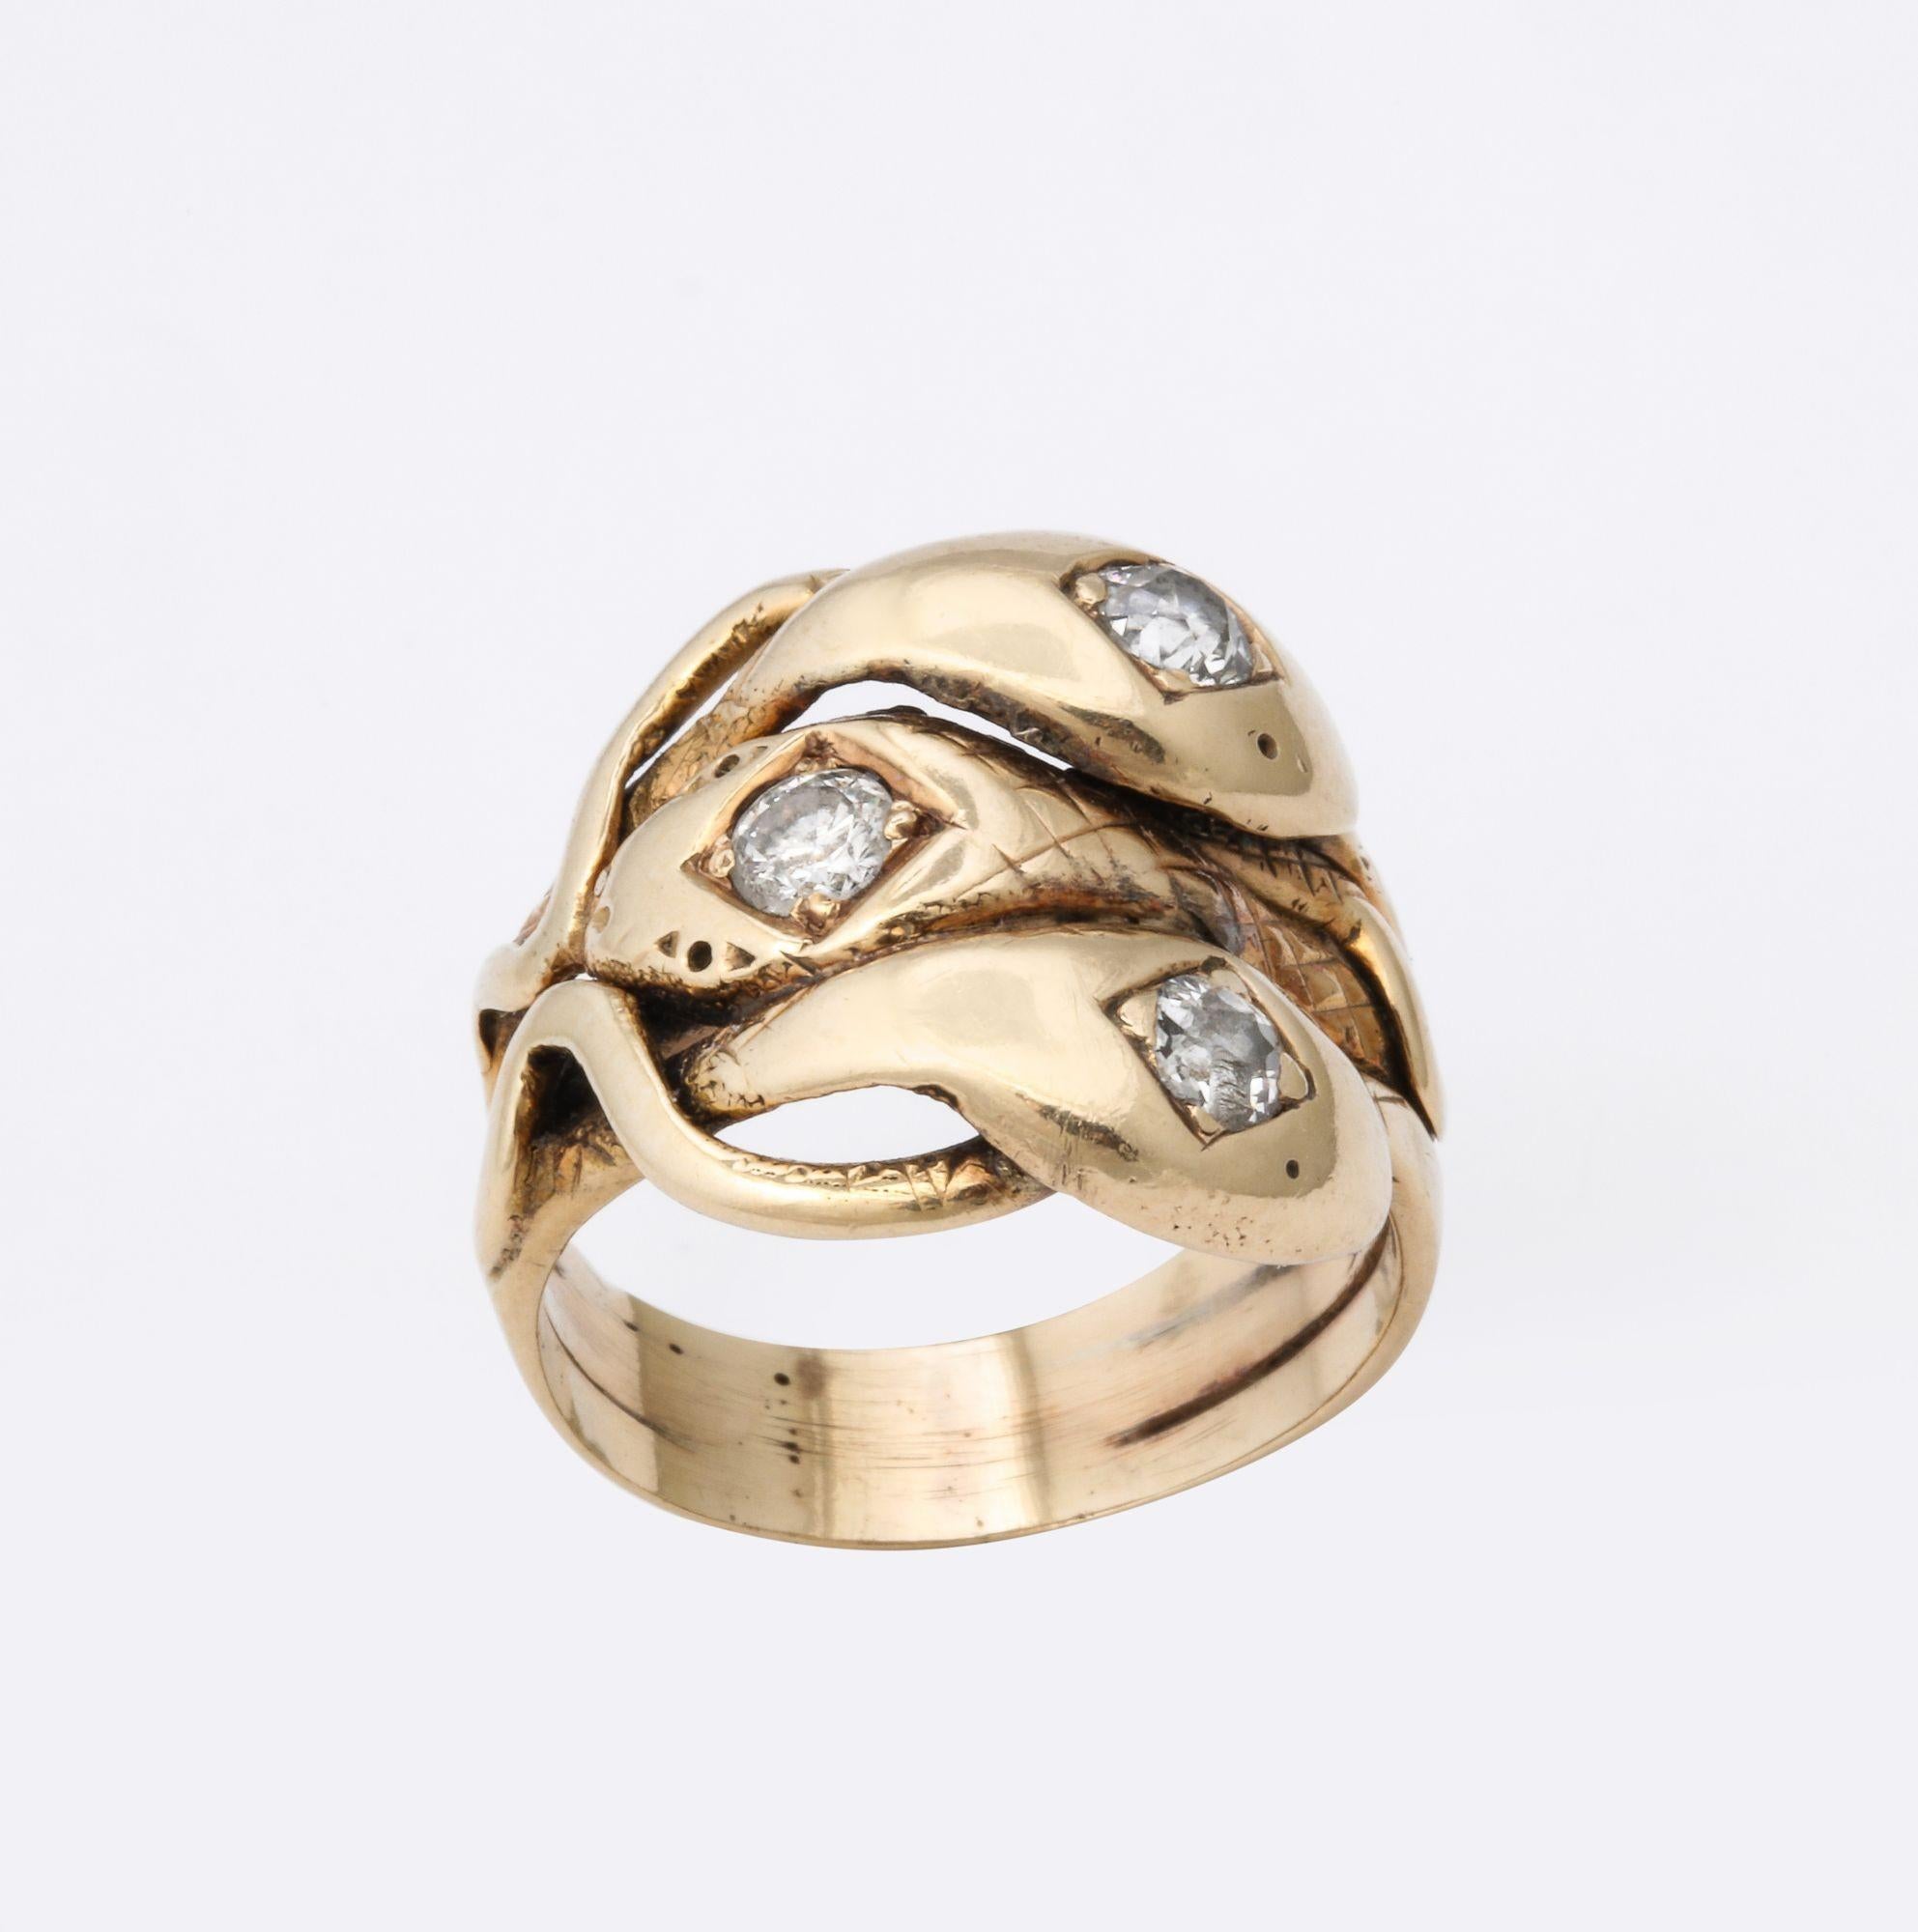 Women's Antique Diamond and Gold Three Headed Snake Ring